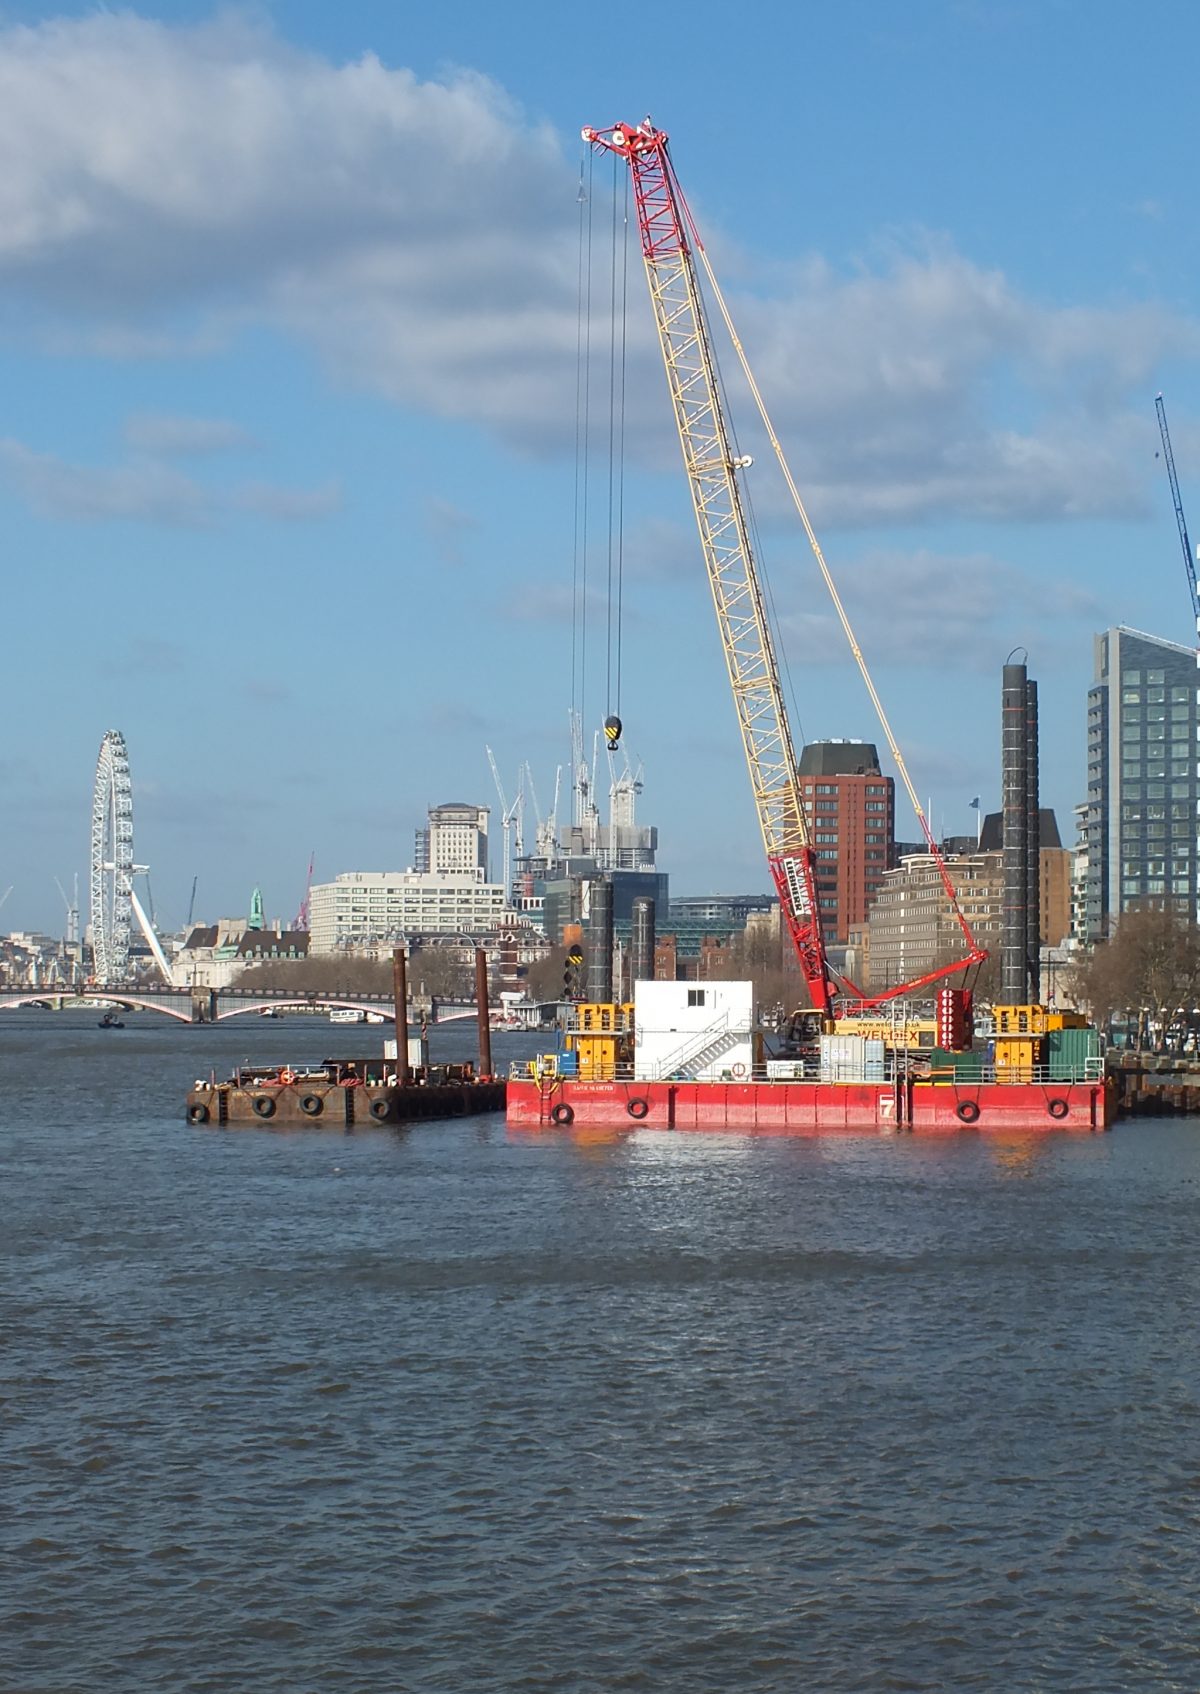 Progress on the Thames Tideway Tunnel Project Continues